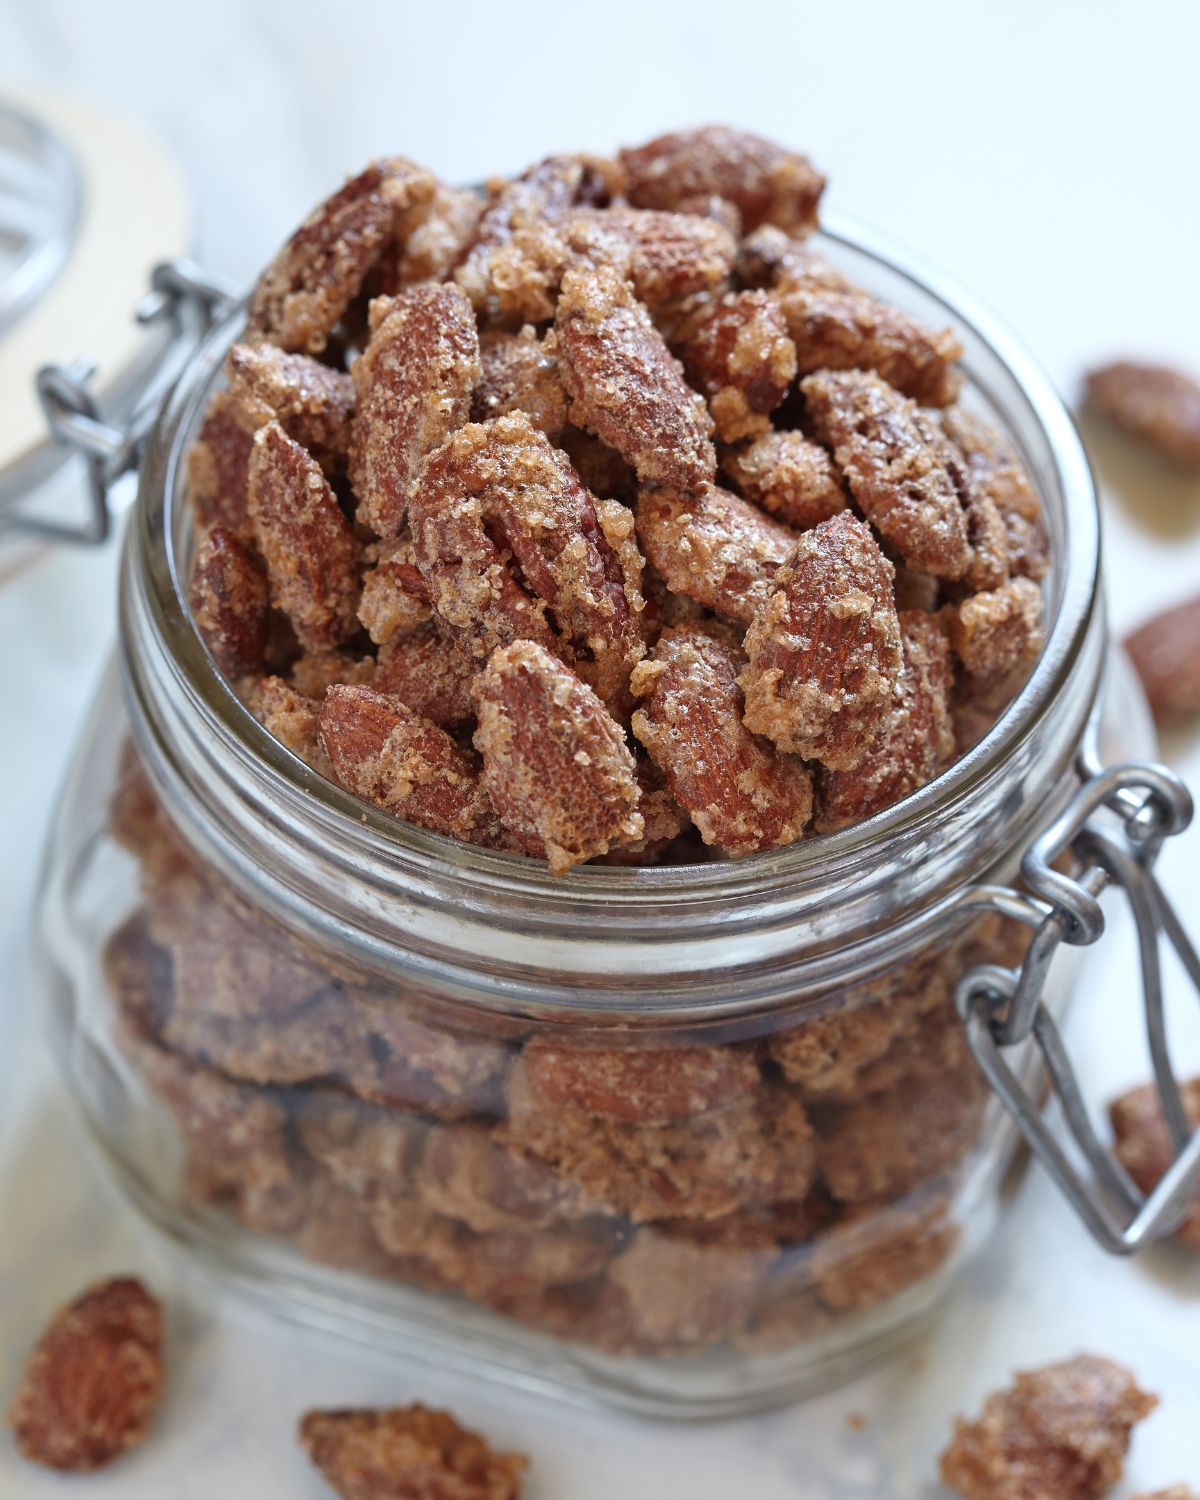 A glass jar of the cinnamon roasted pecans.